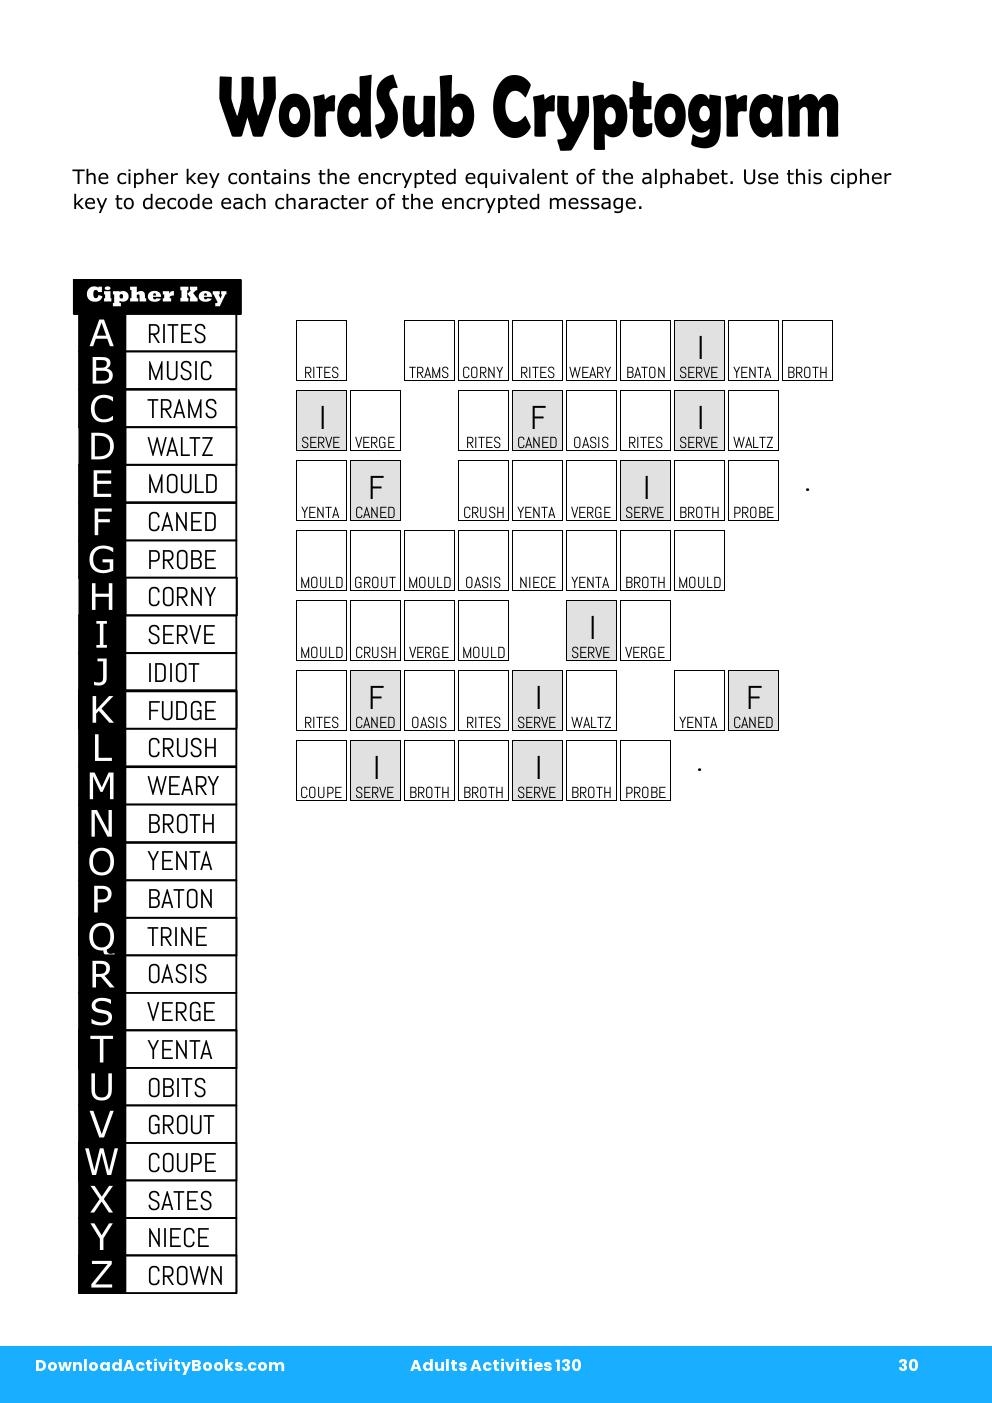 WordSub Cryptogram in Adults Activities 130